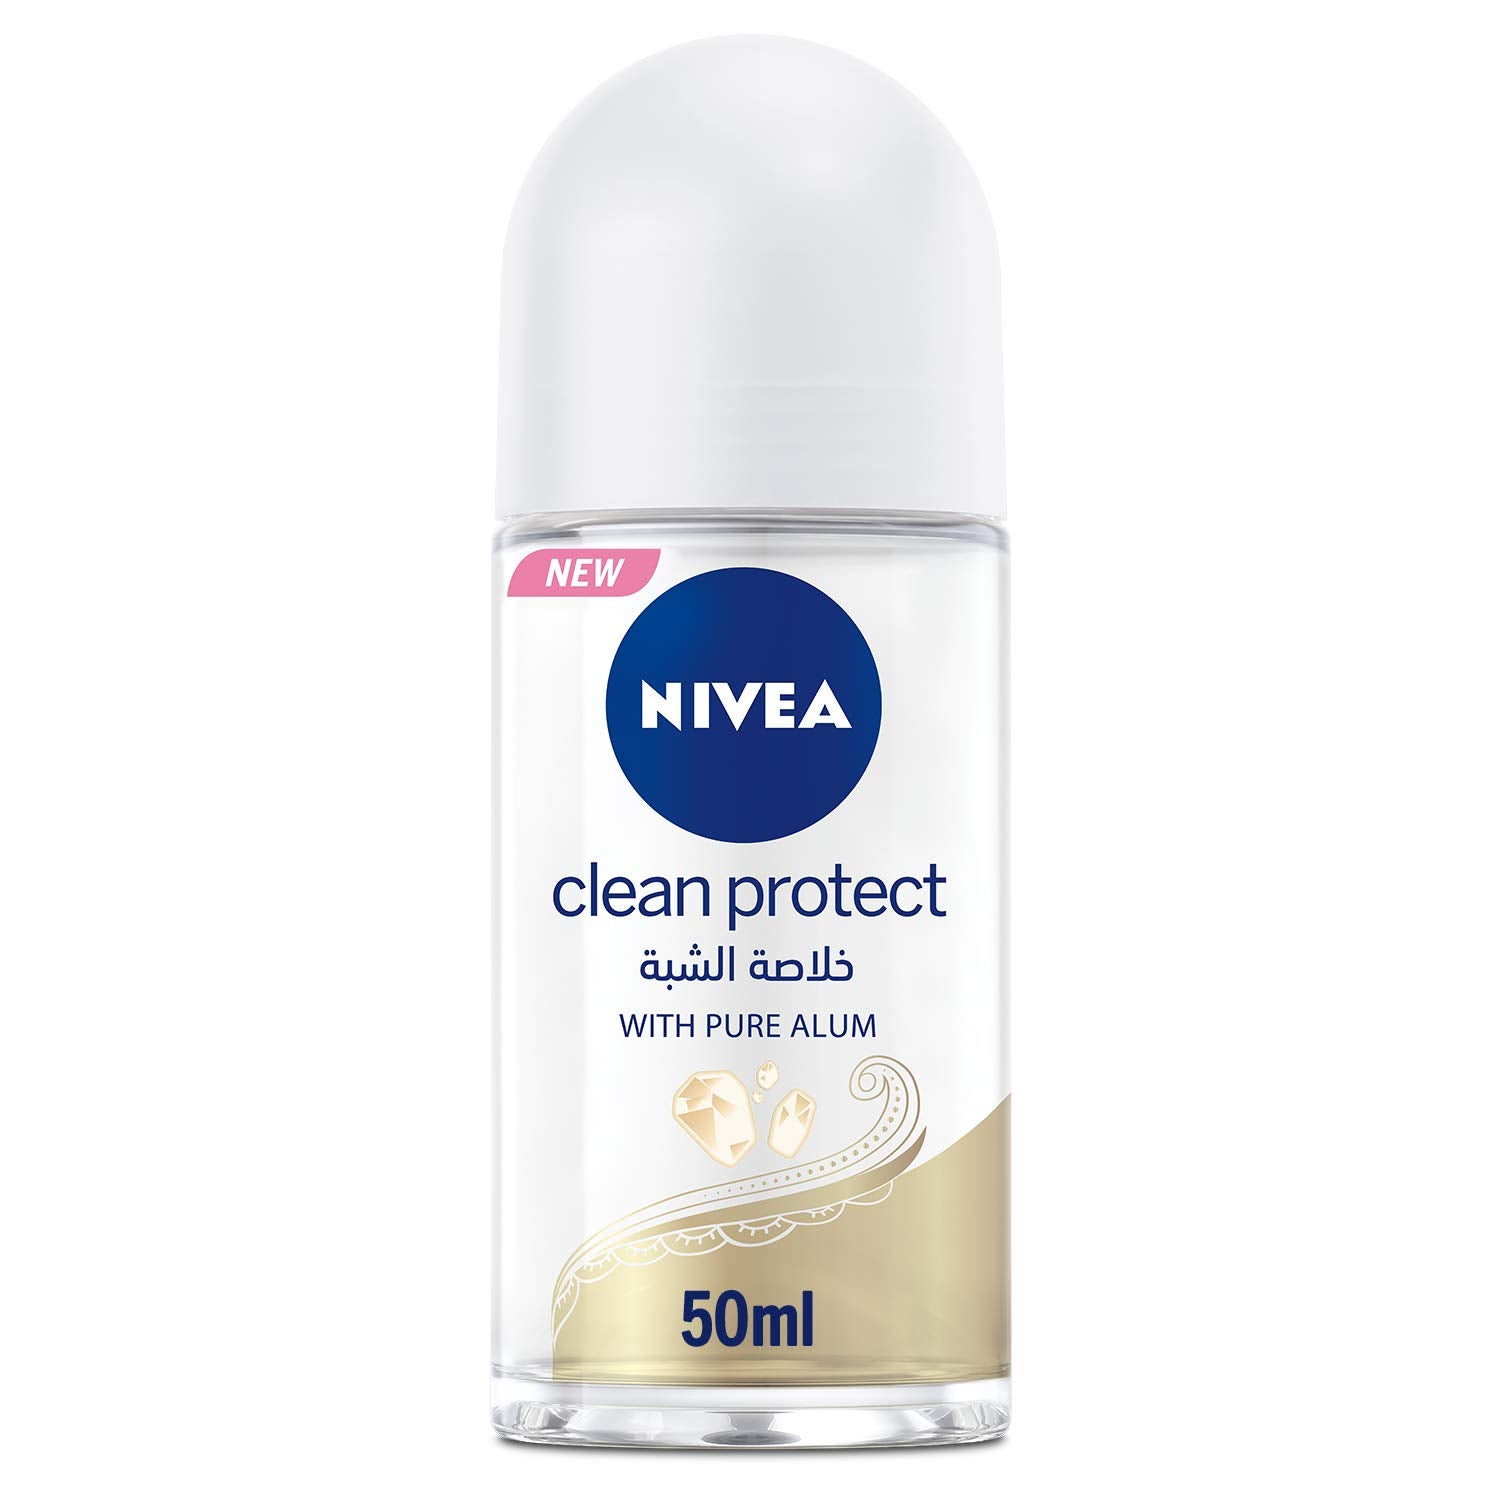 NIVEA women Roll-on clean protect -50ml